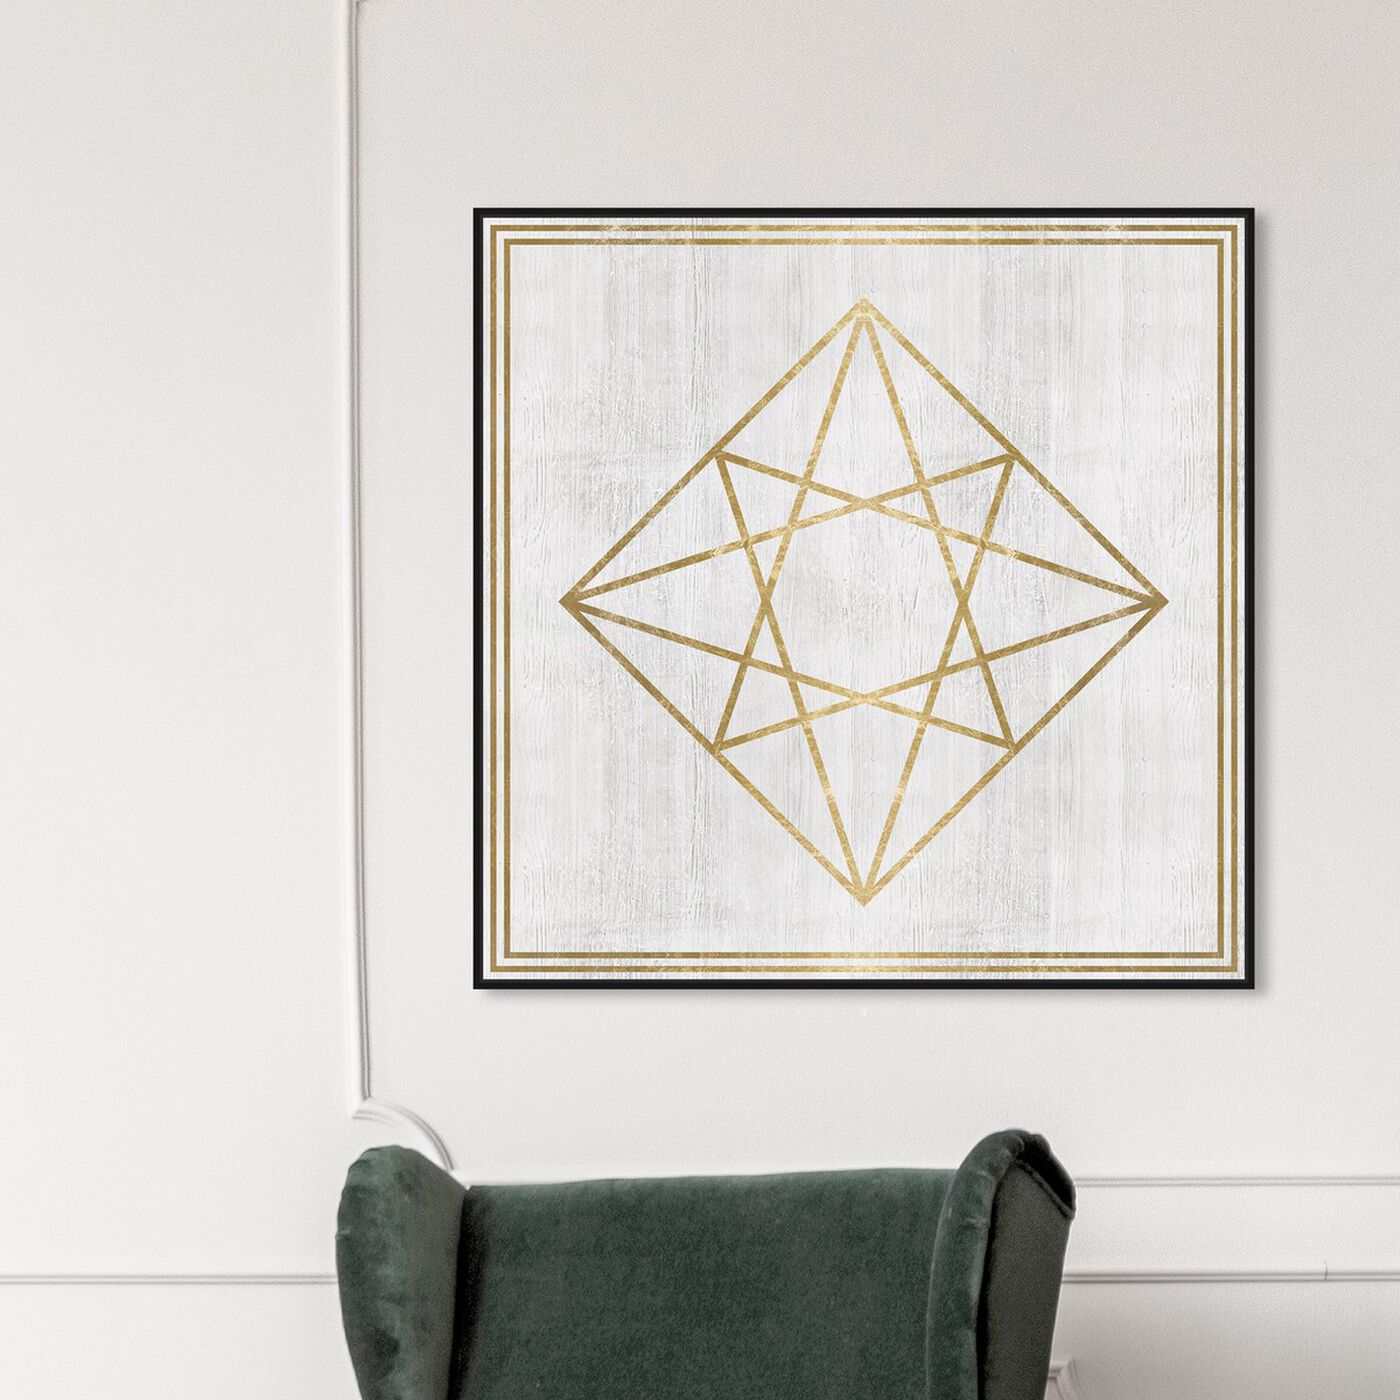 Hanging view of Whitewash Wood Geometric Diamond featuring abstract and geometric art.